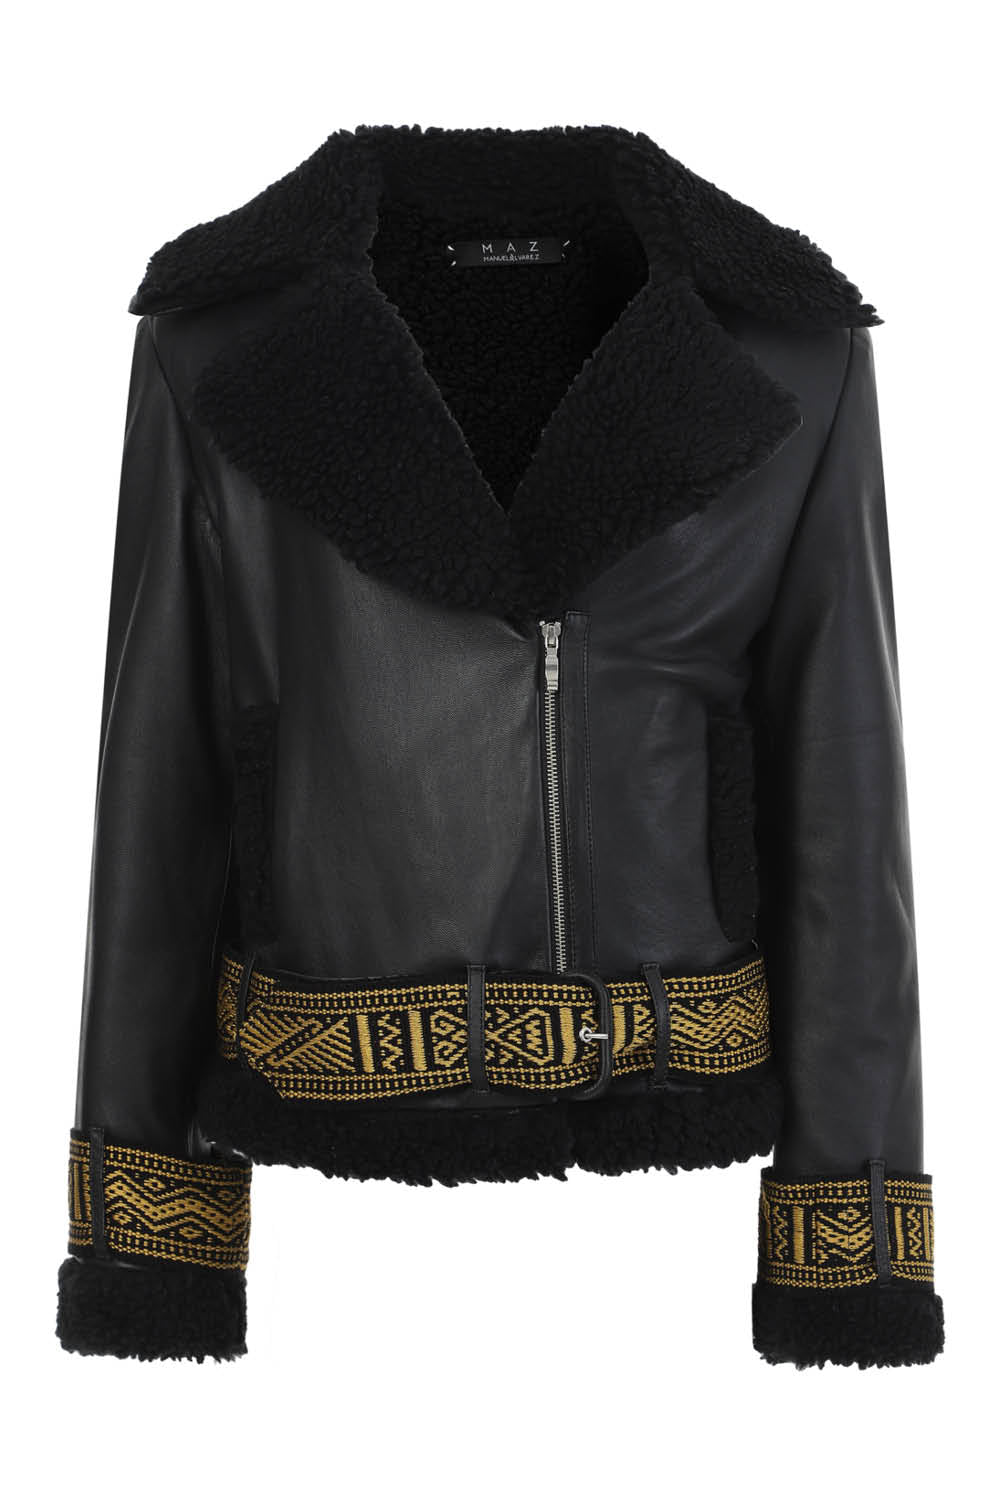 LEATHER CHUMBE JACKET IN BLACK / BLACK GOLD HANDCUFFS AND BELT